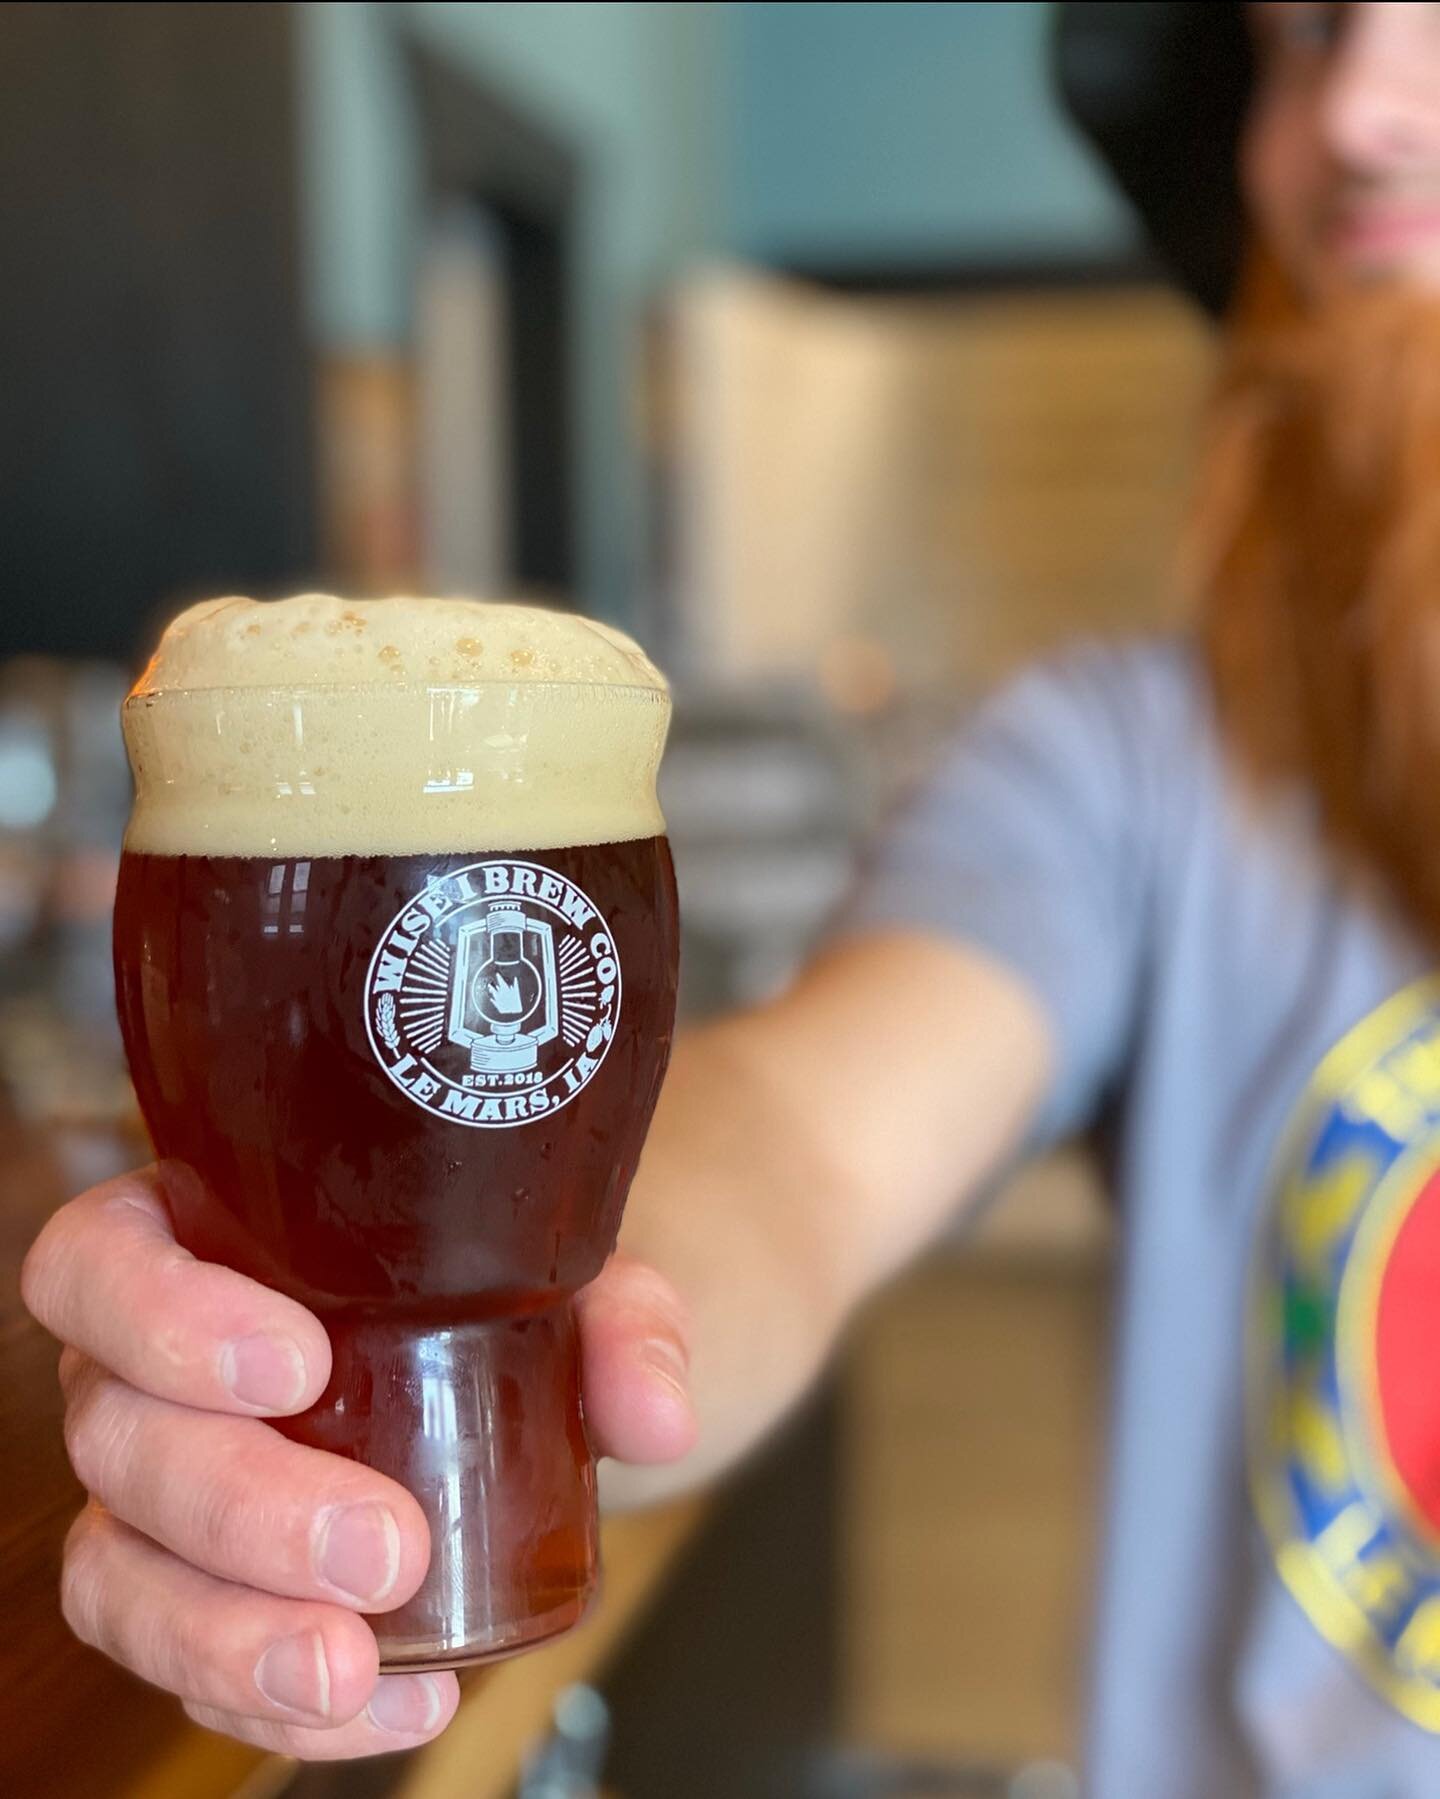 We're all Irish after a few beers! We're celebrating St. Patrick's Day with a dollar off pints of Red Rabbits, our Irish Red. Today only! See you at 3 🍀